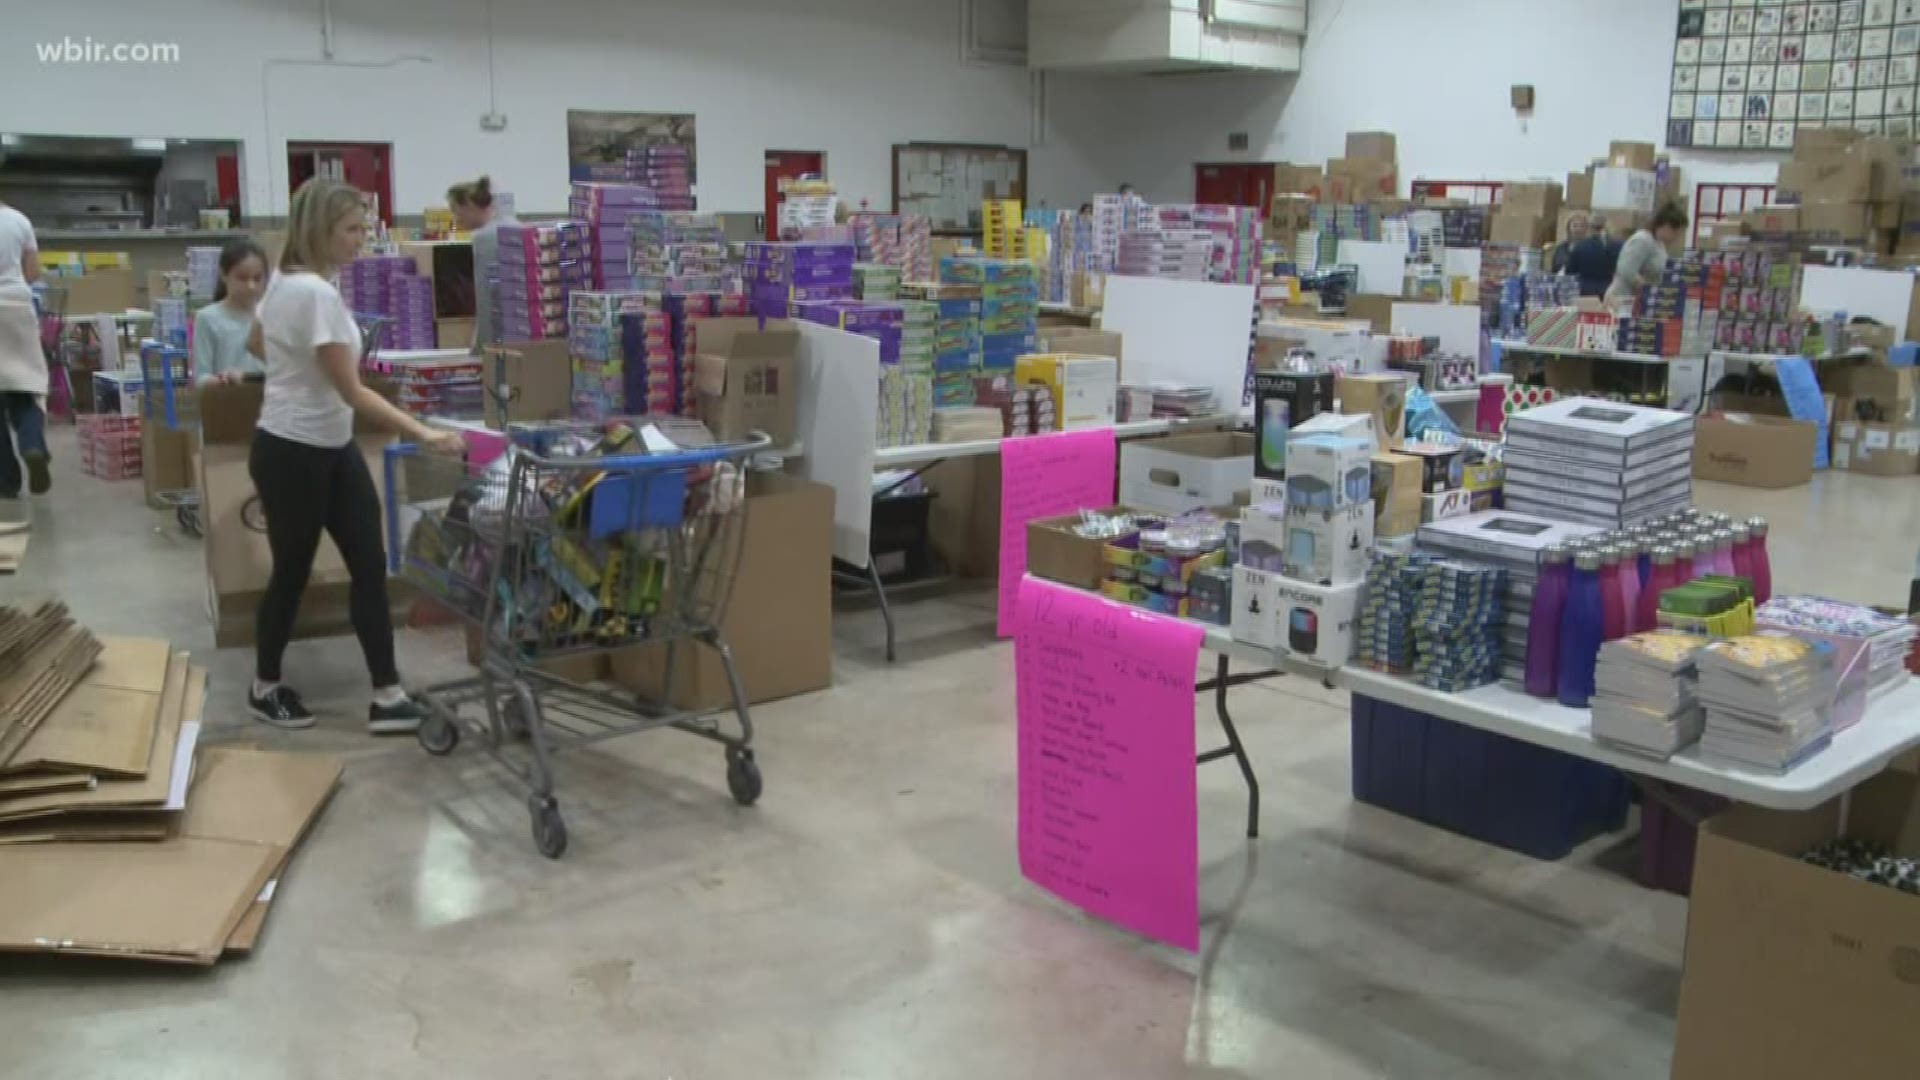 Volunteers said the need is greater than ever this year.